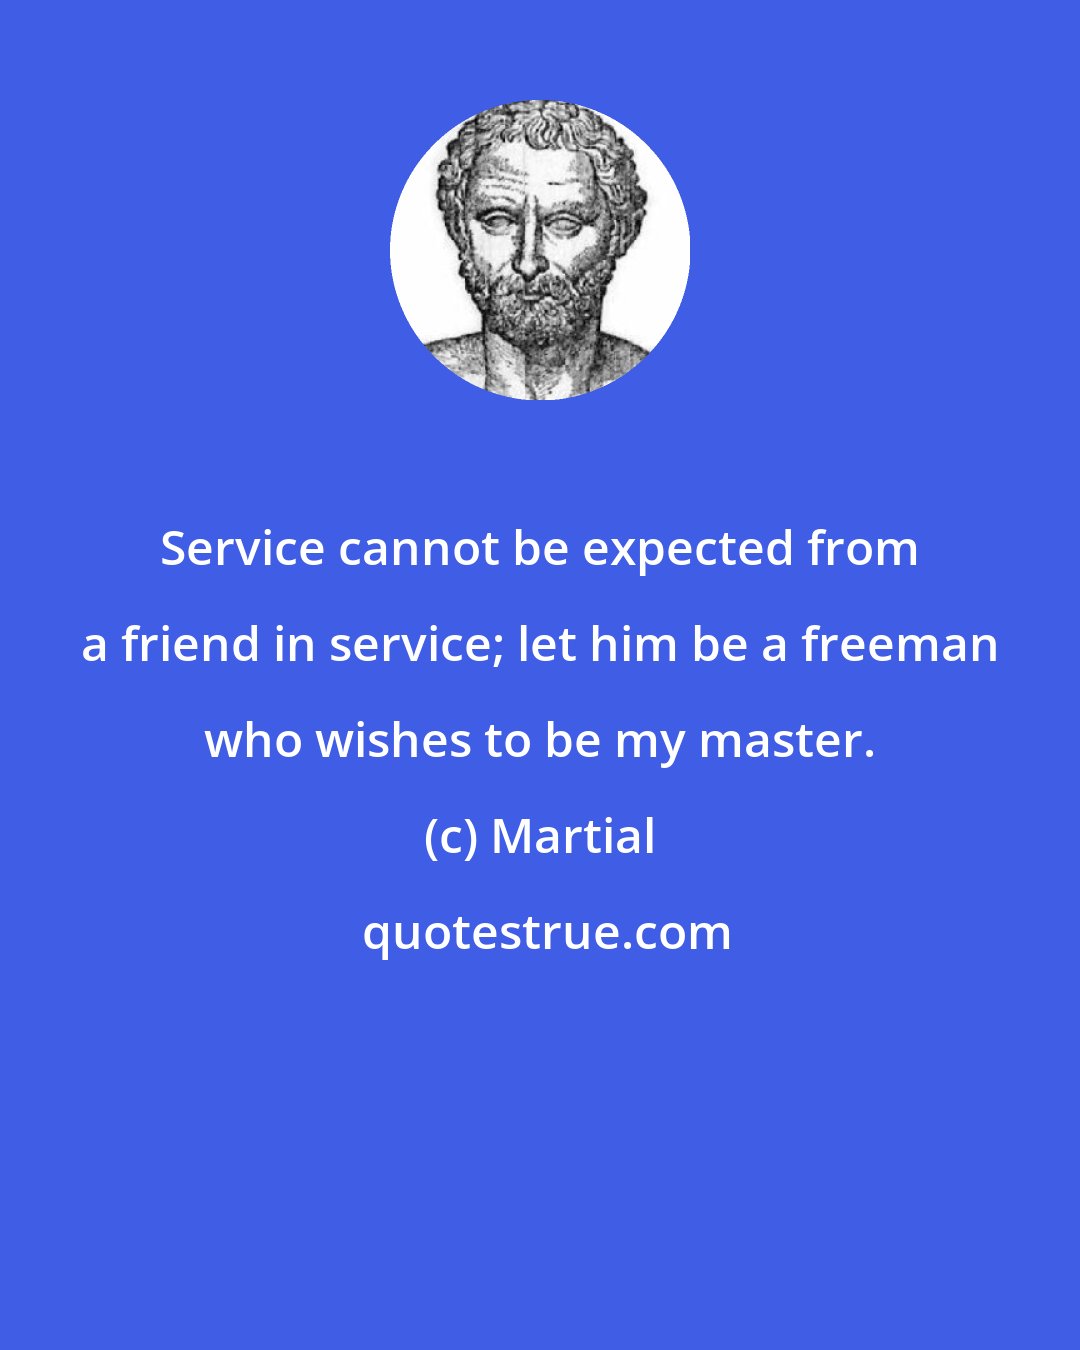 Martial: Service cannot be expected from a friend in service; let him be a freeman who wishes to be my master.